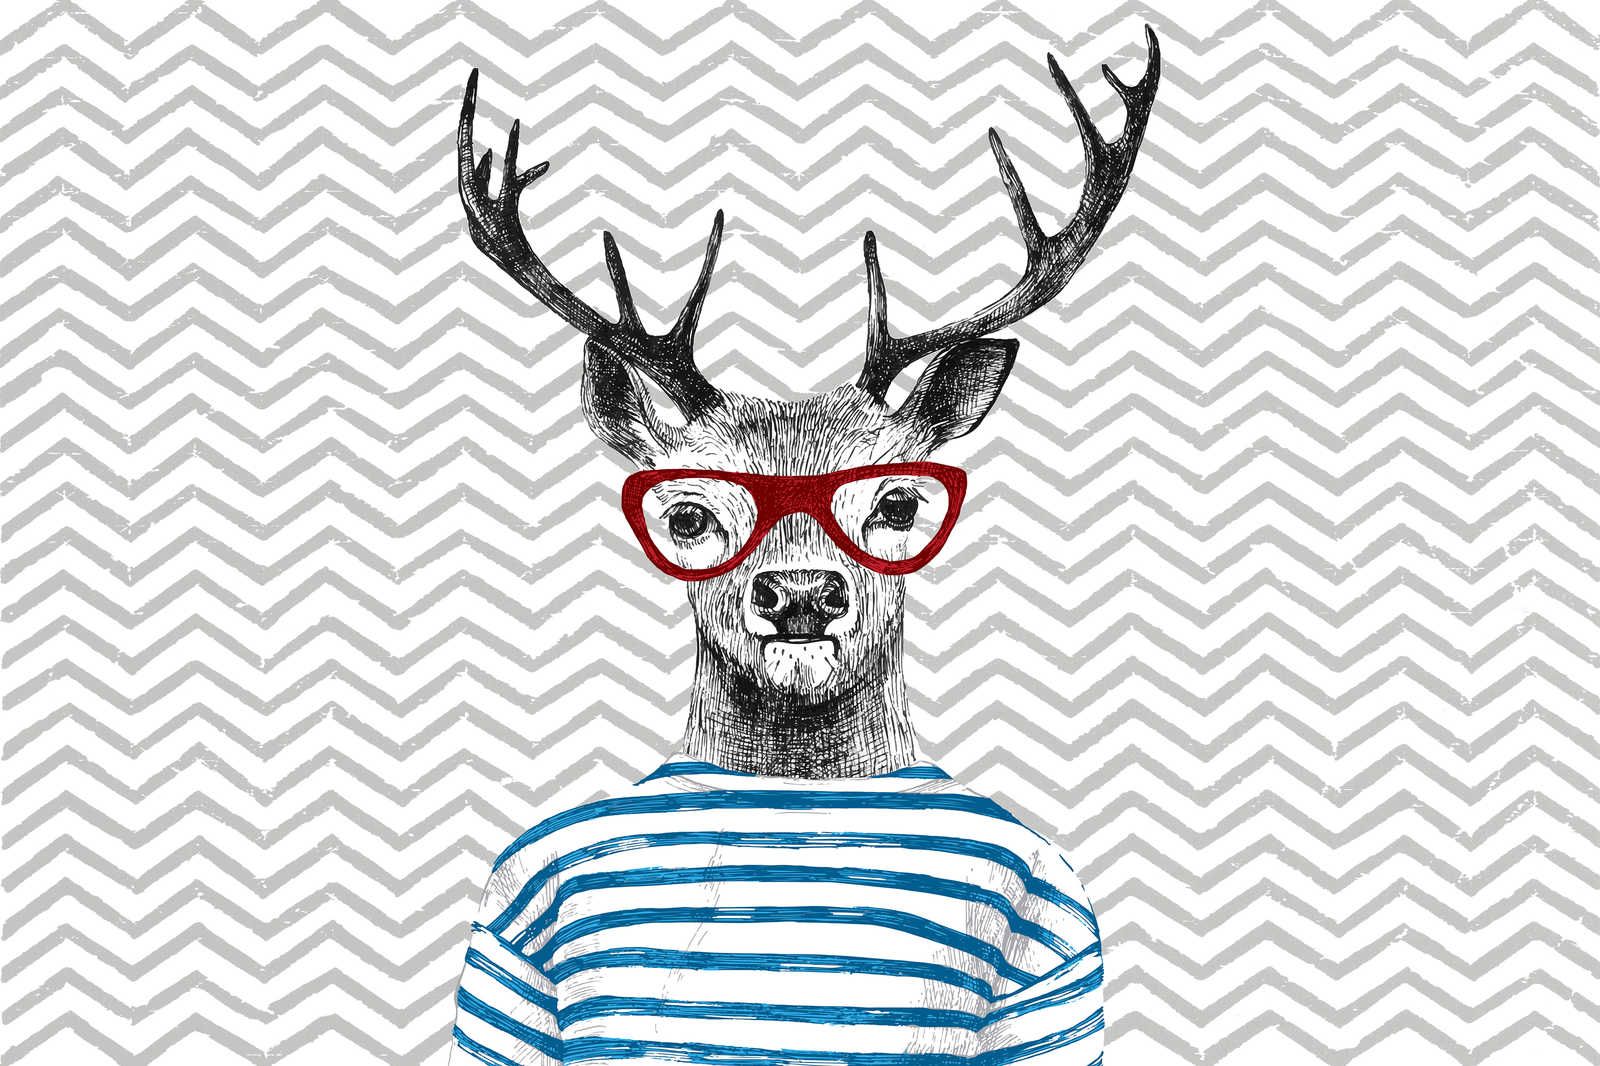             Nursery canvas picture comic design, deer with glasses - 0.90 m x 0.60 m
        